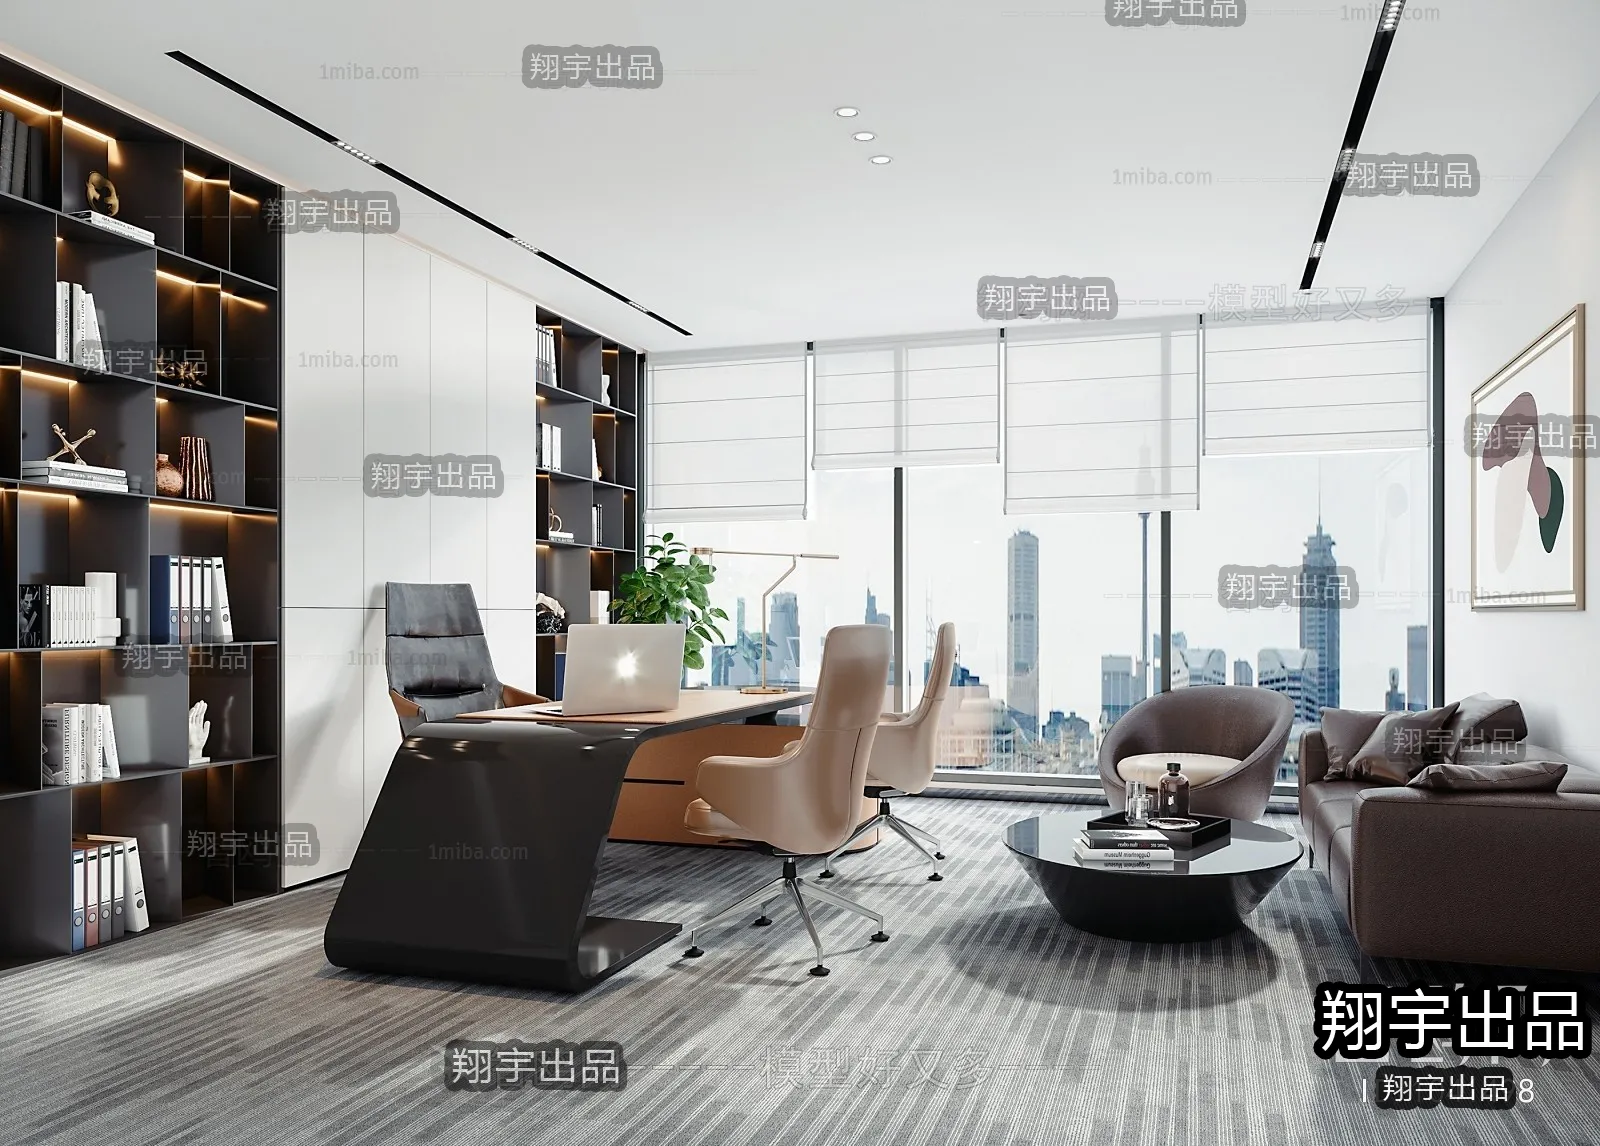 3D OFFICE INTERIOR (VRAY) – MANAGER ROOM 3D SCENES – 102